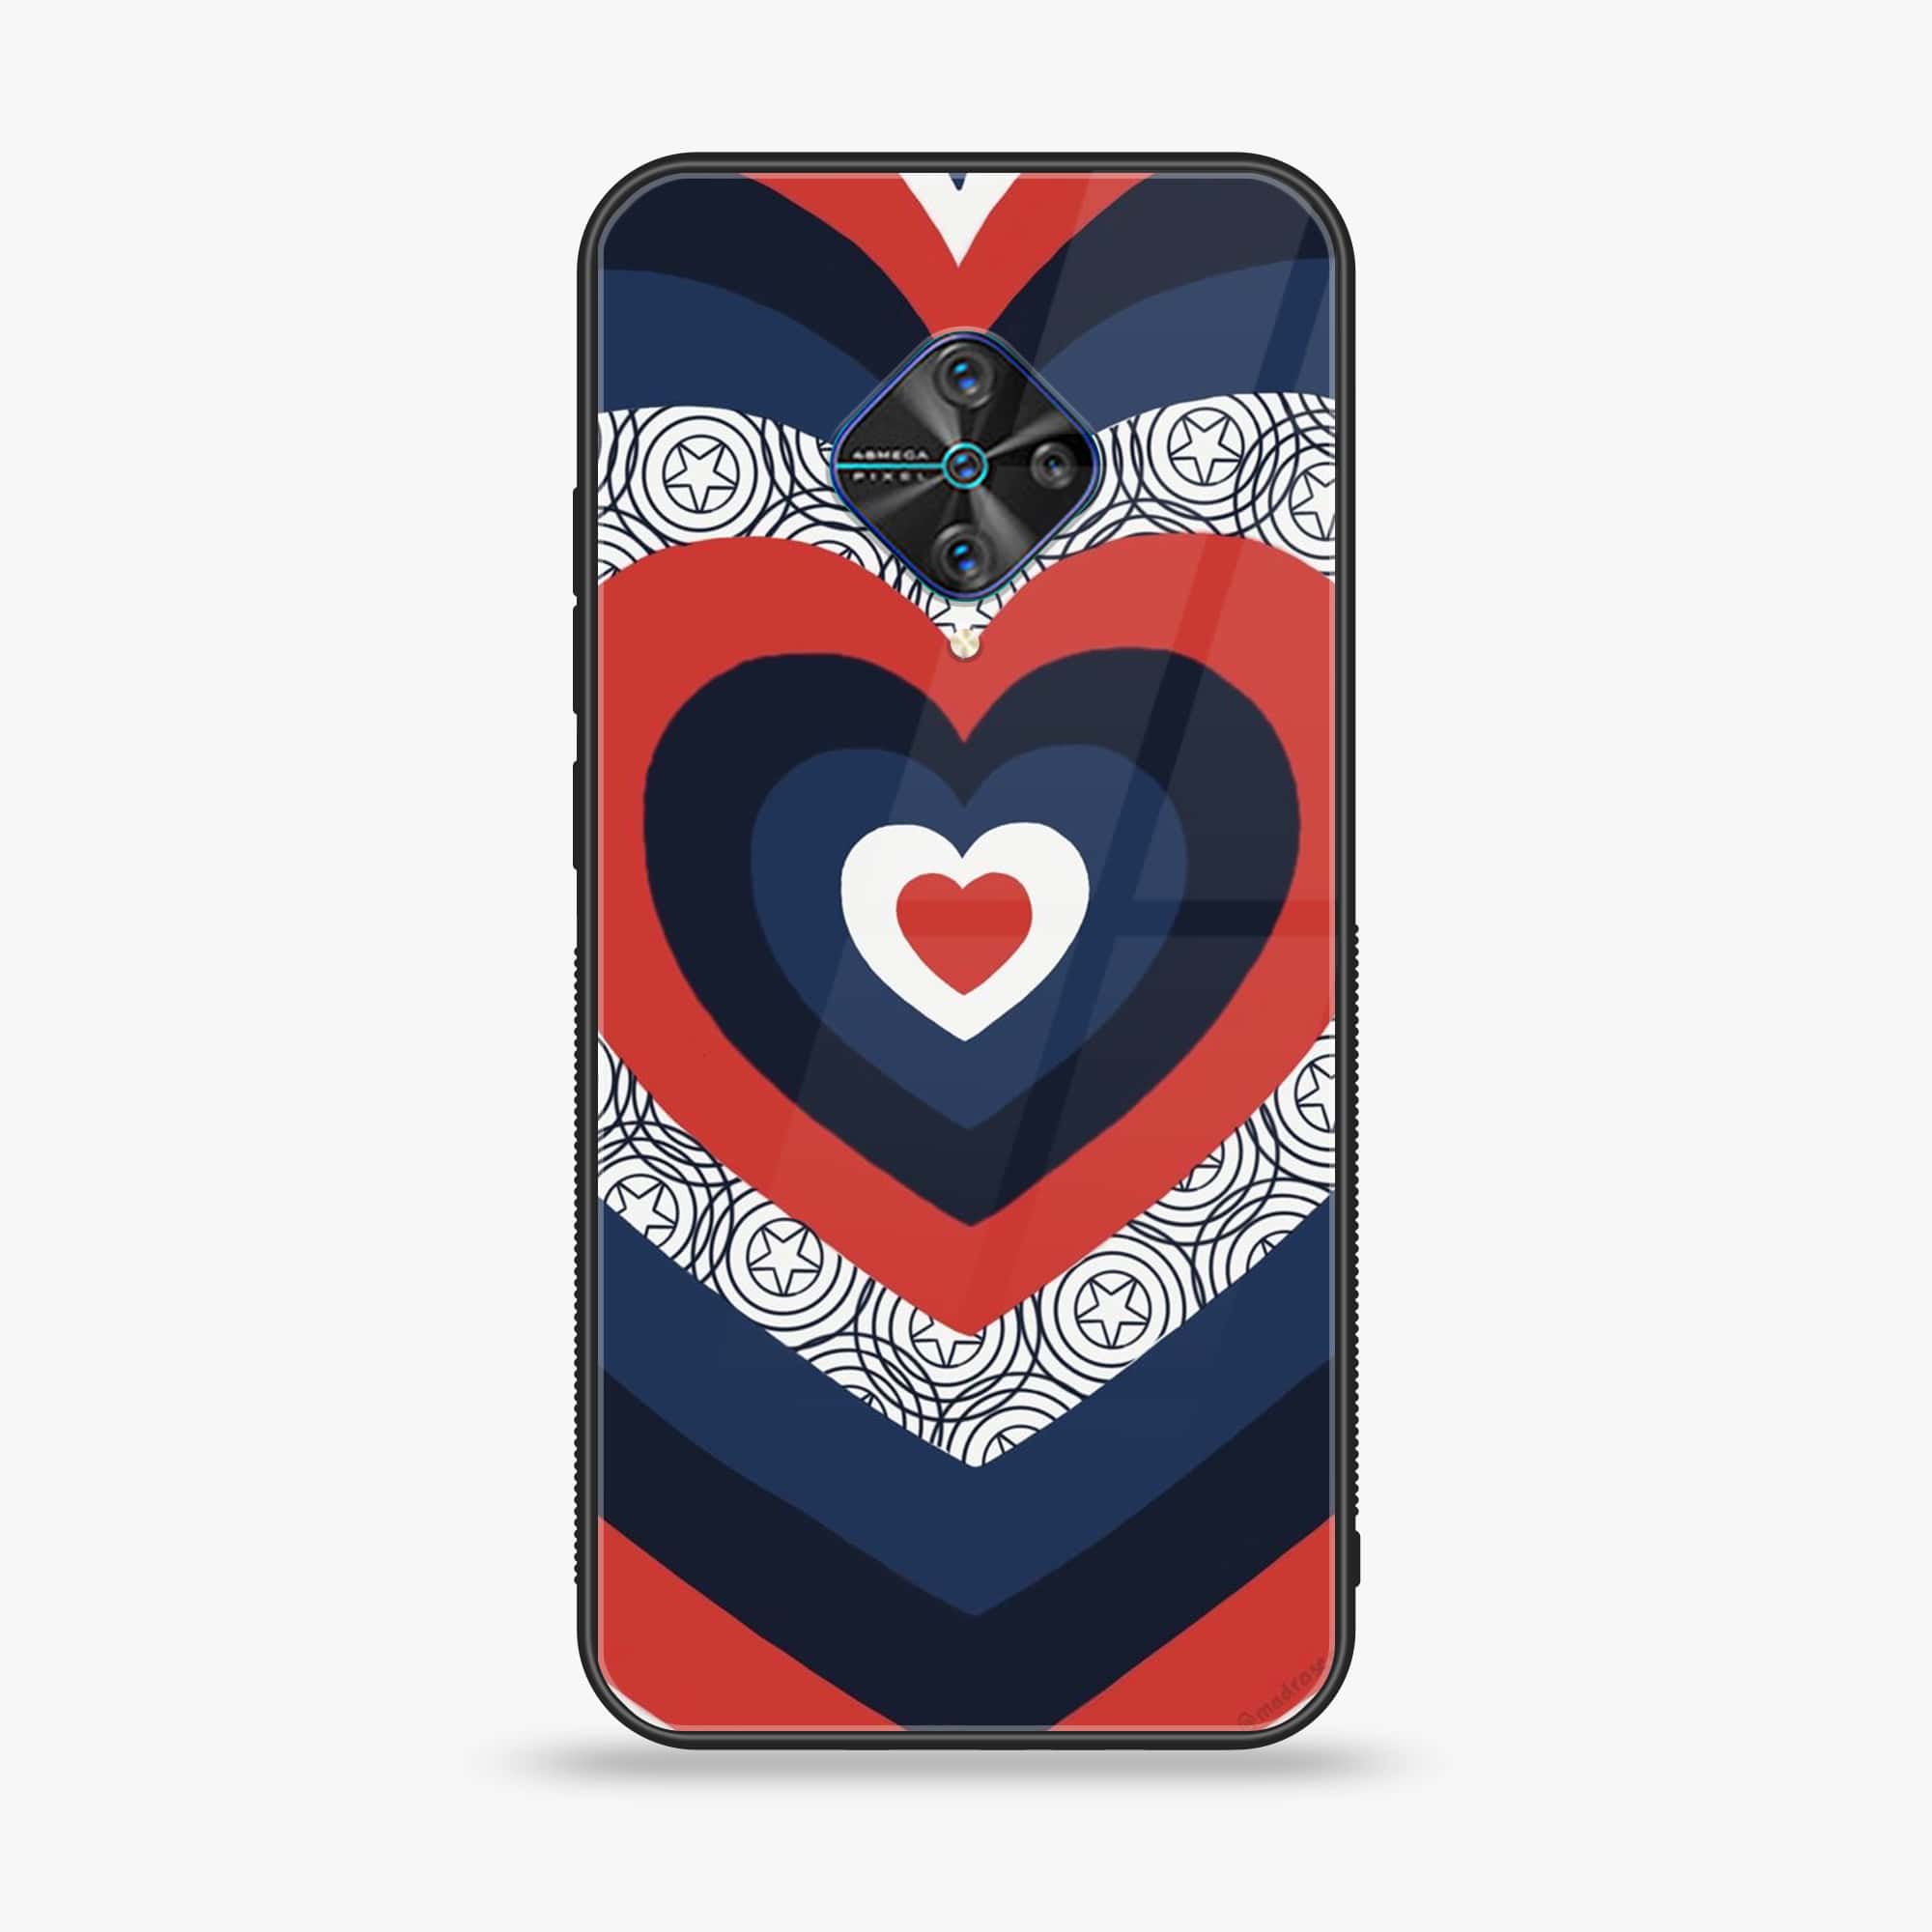 Vivo Y51 (Camera in middle) - Heart Beat Series 2.0 - Premium Printed Glass soft Bumper shock Proof Case